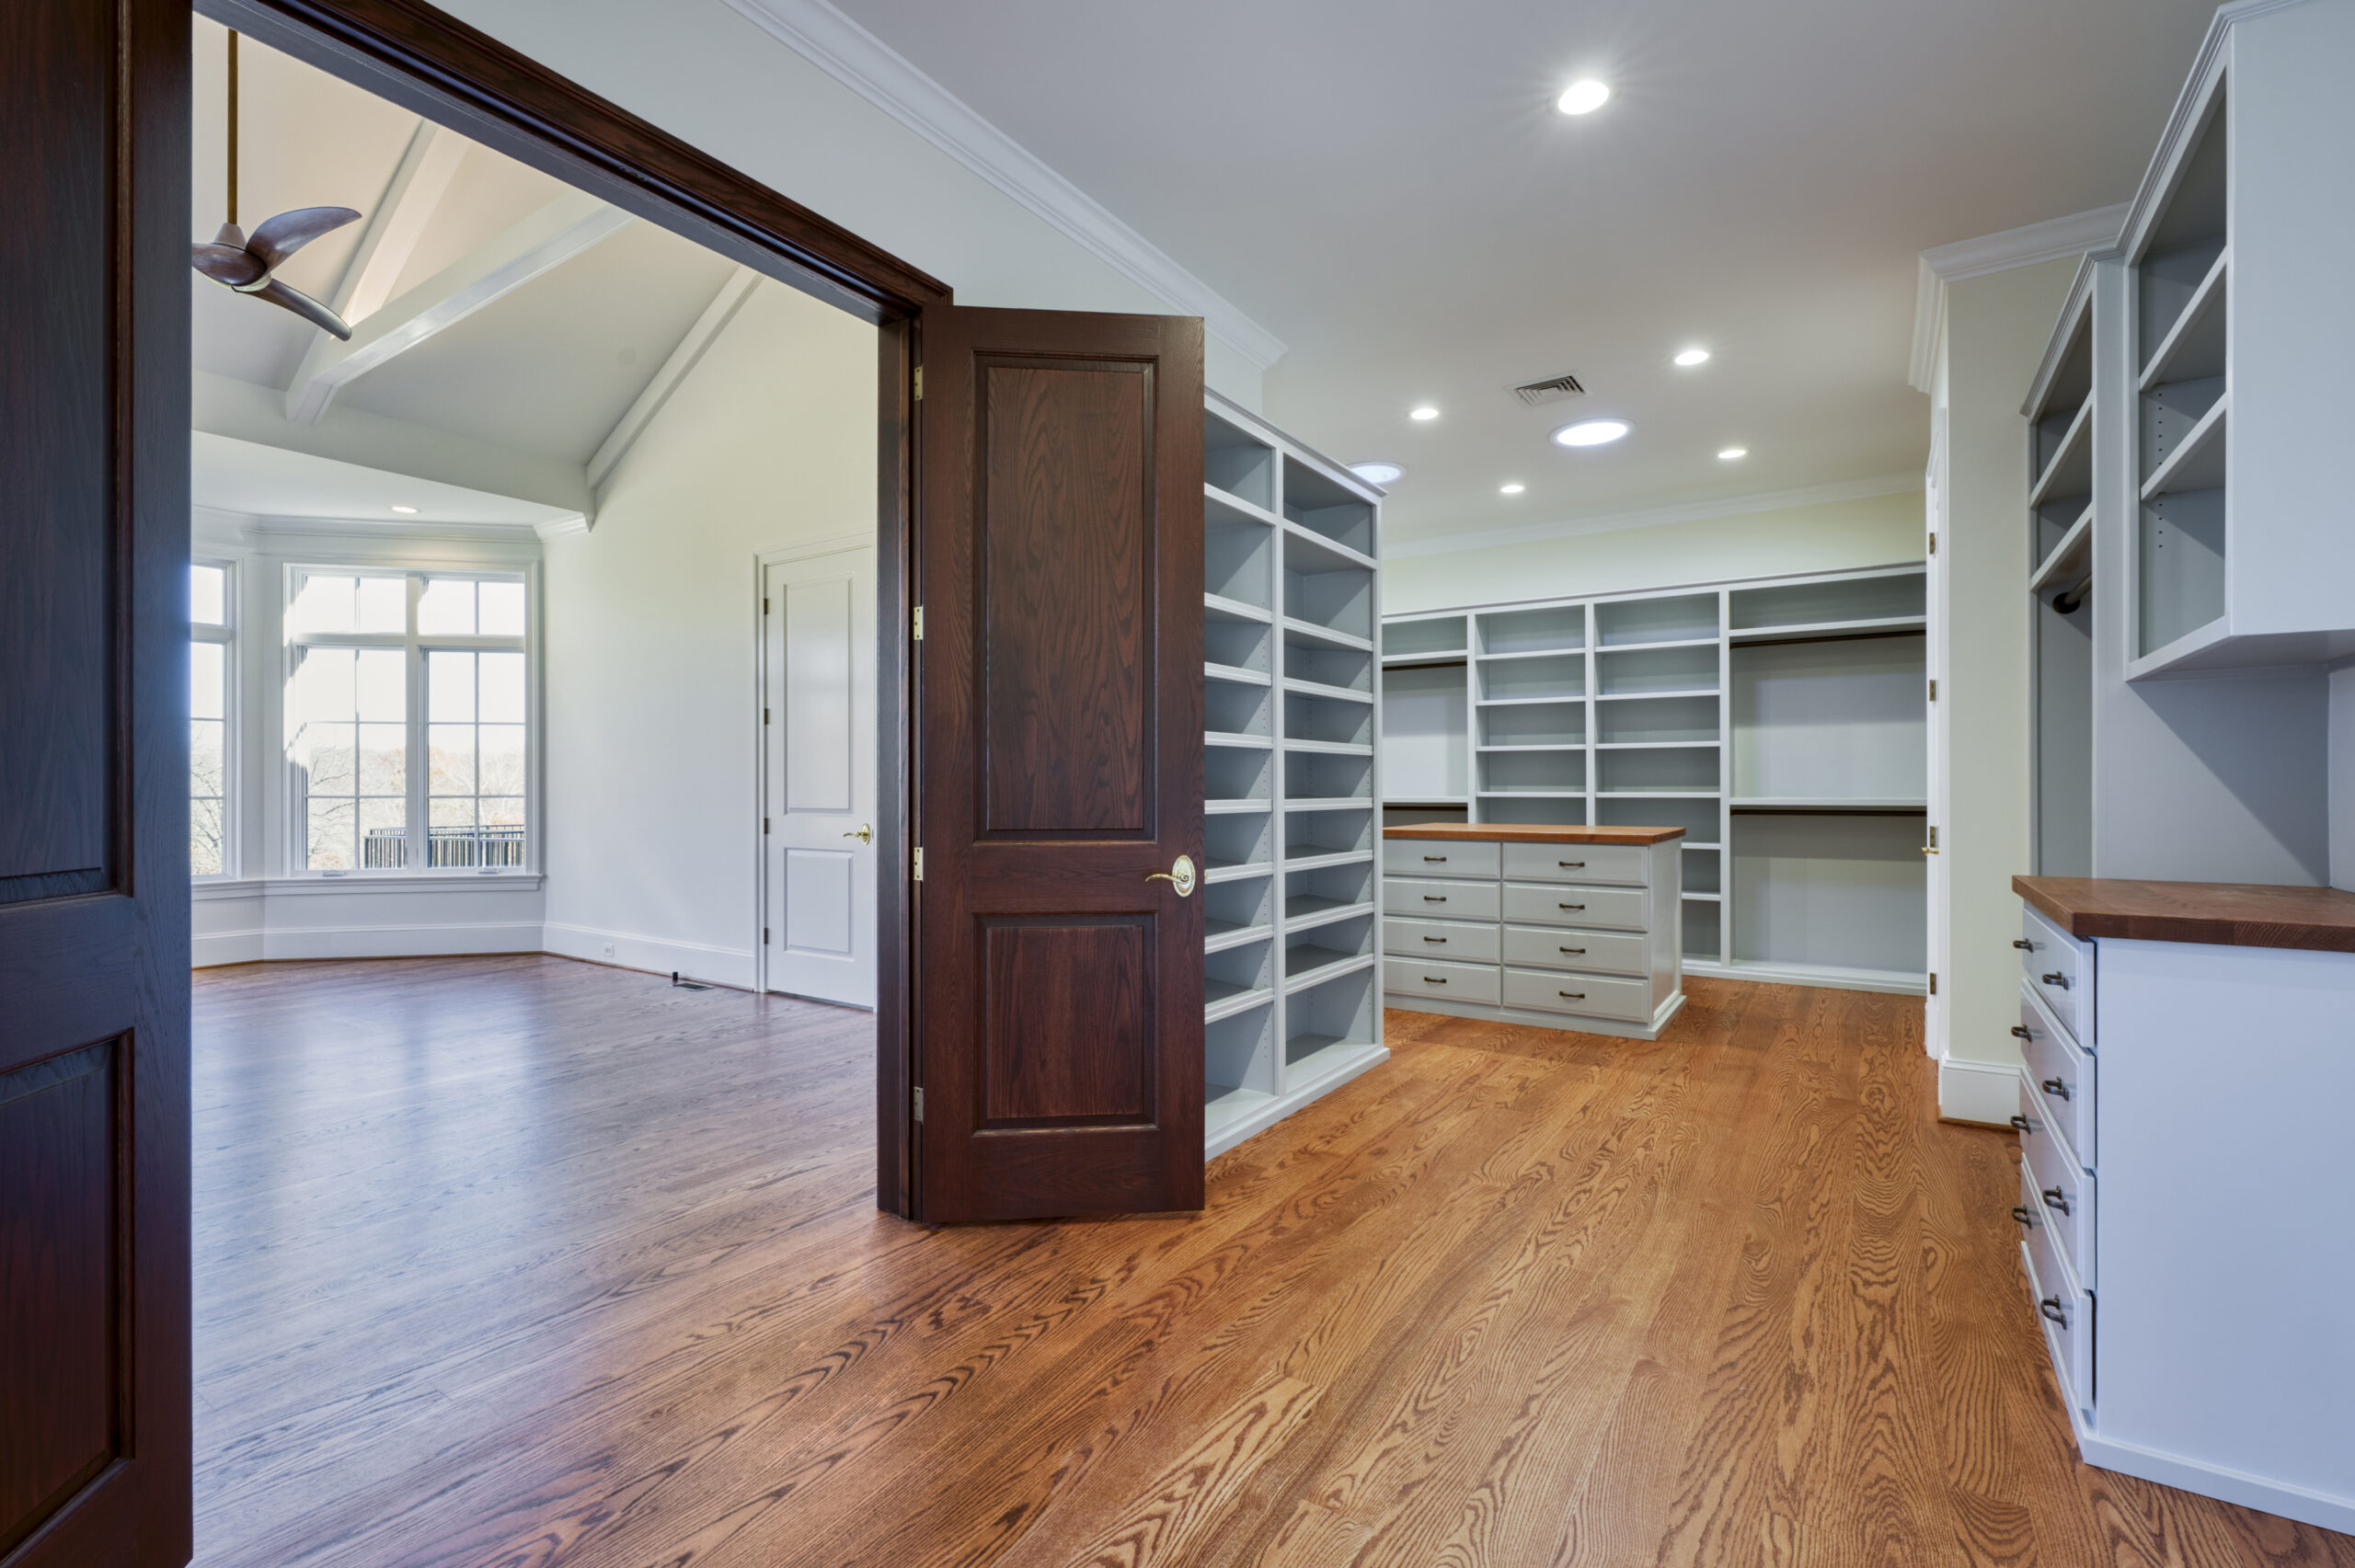 Professional interior photo of custom build new home by Black Oak Construction - showing the primary walk in closet which is fully built out with custom shelves, drawers, and an island with drawers